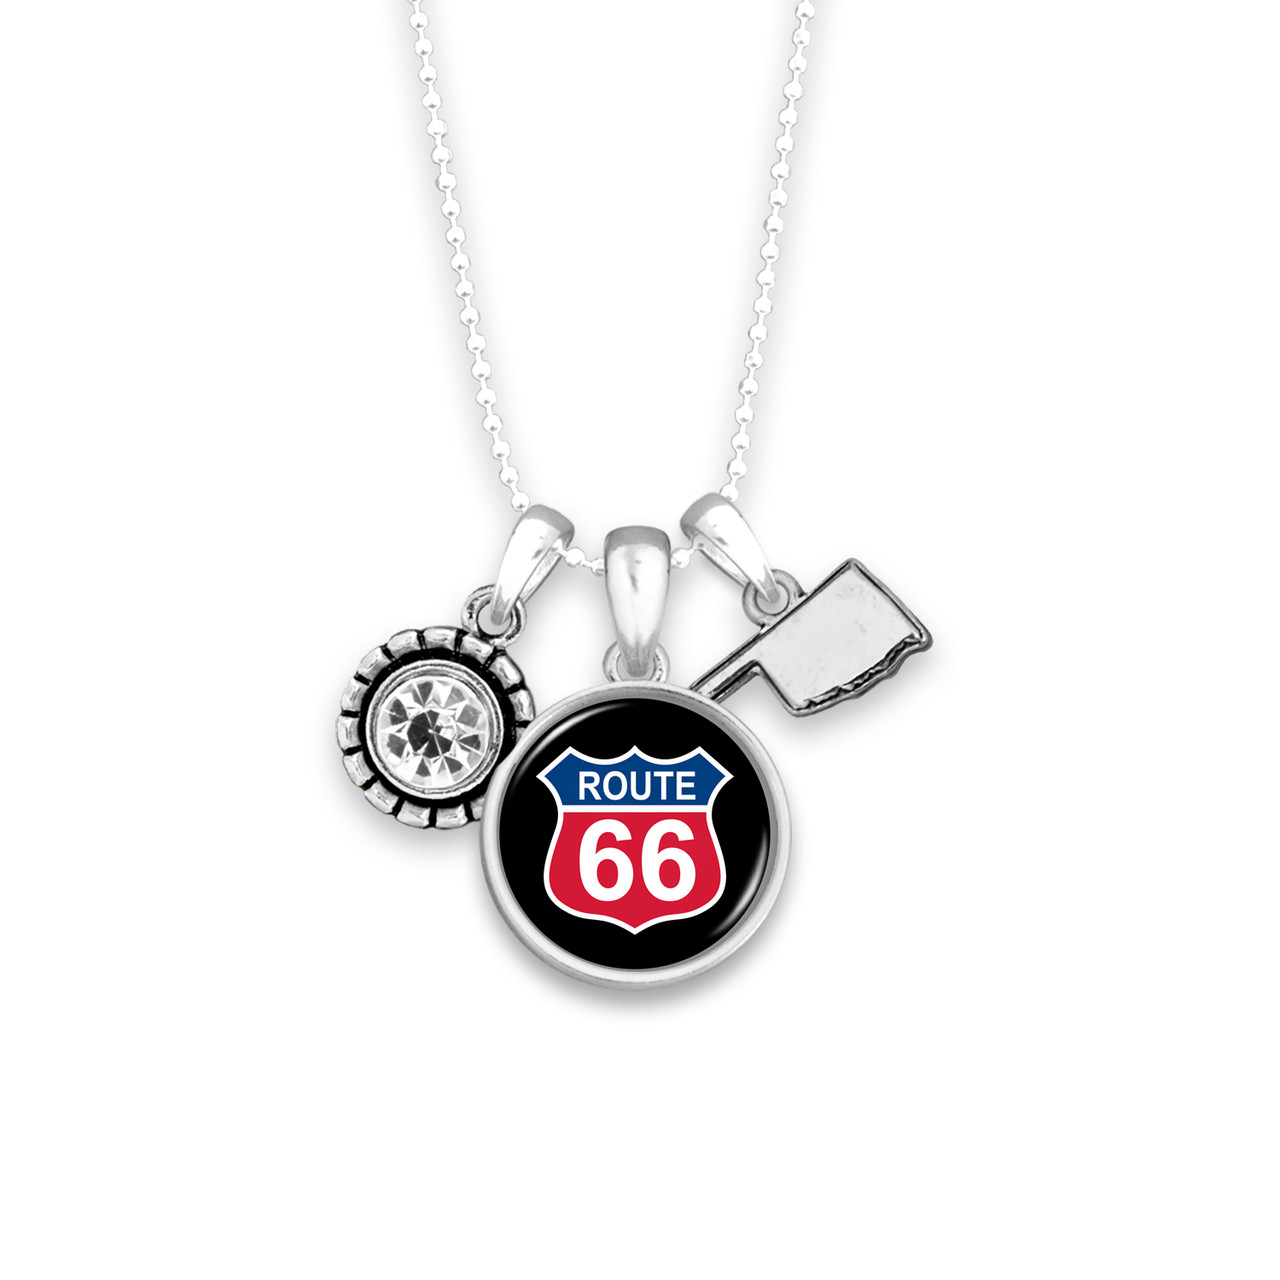 Route 66 Home Sweet School Necklace - Oklahoma